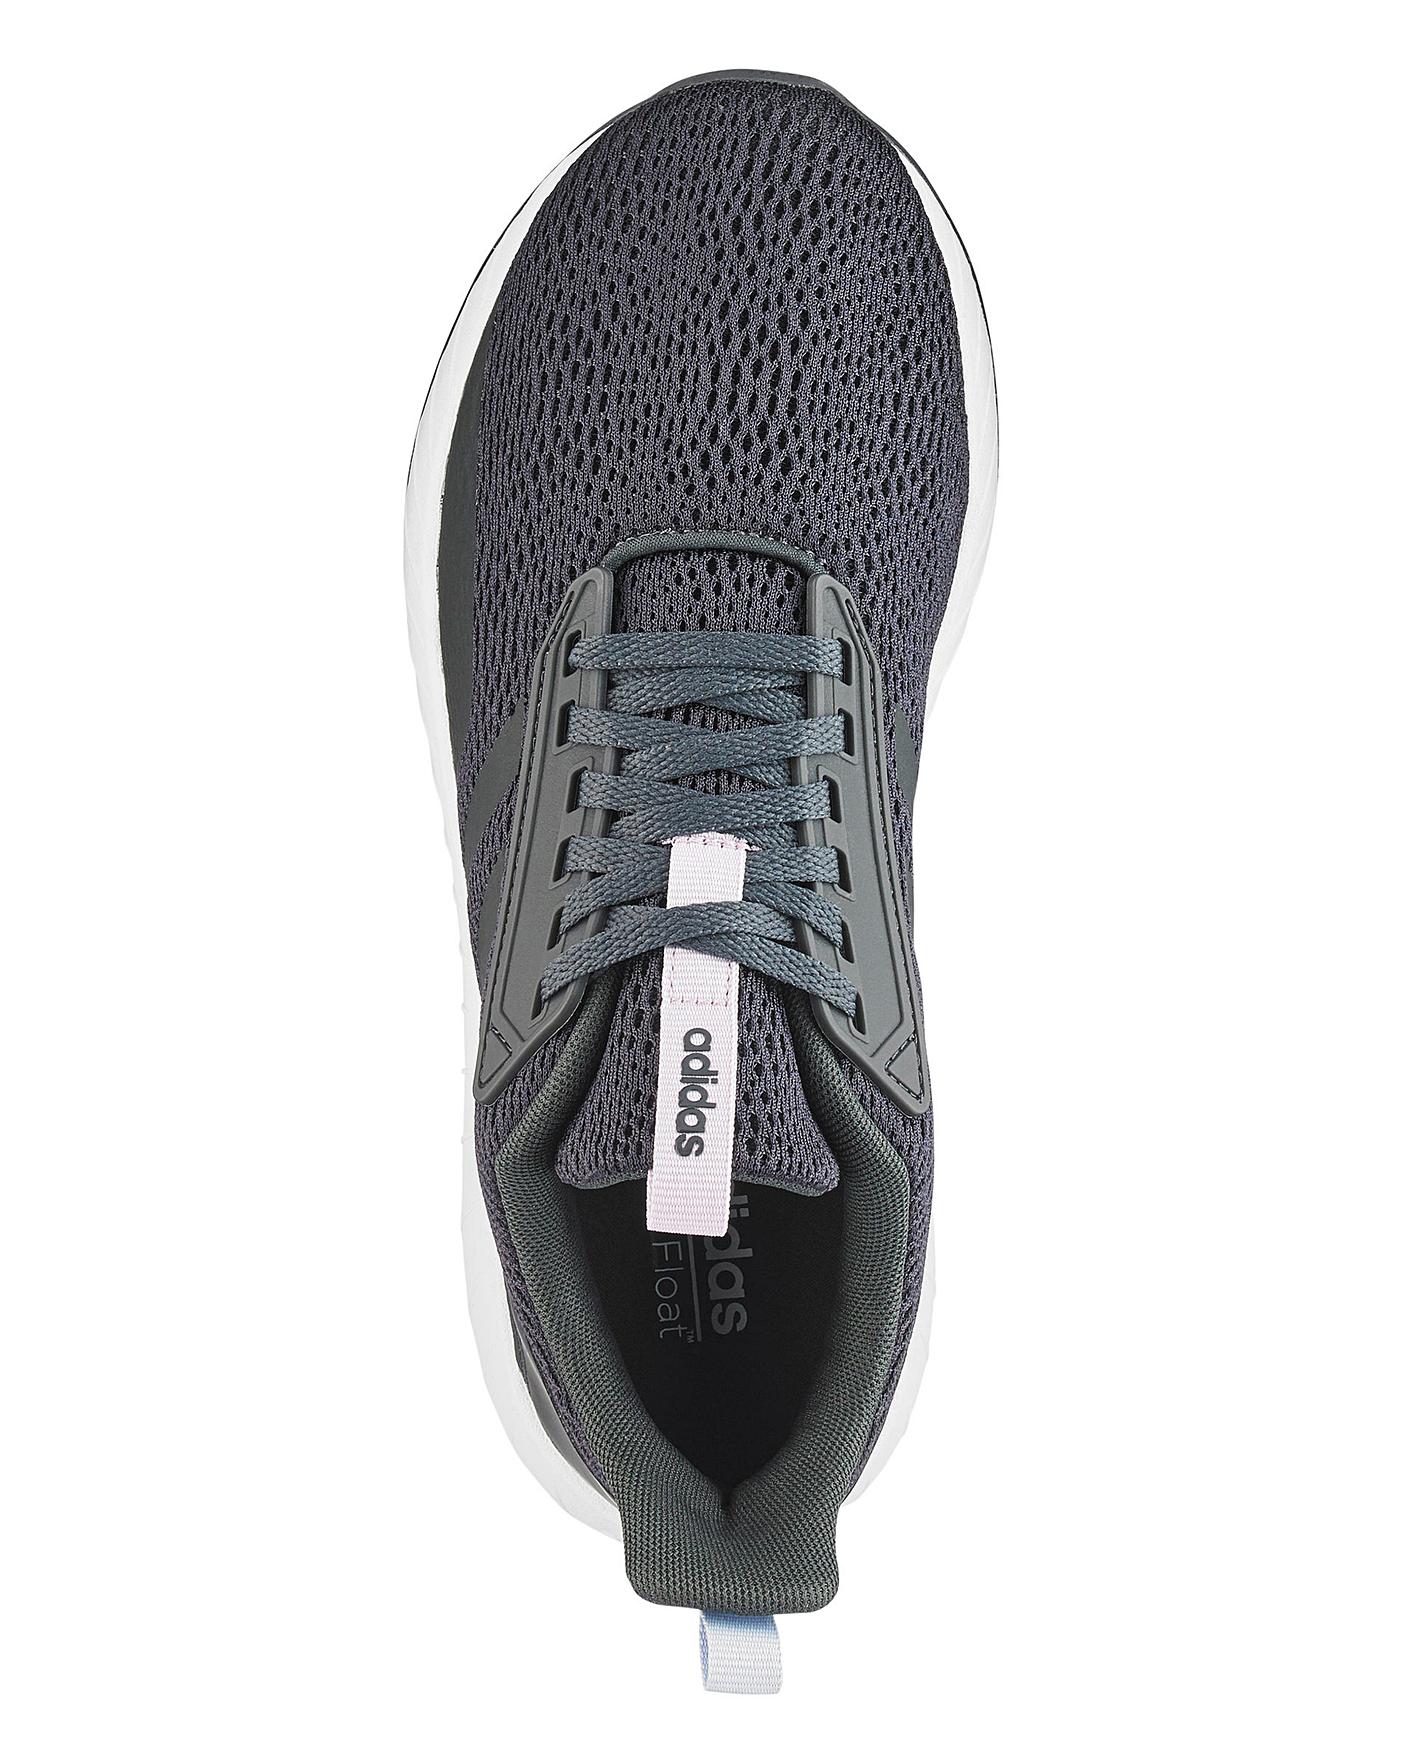 adidas Questar Drive Trainers | Oxendales